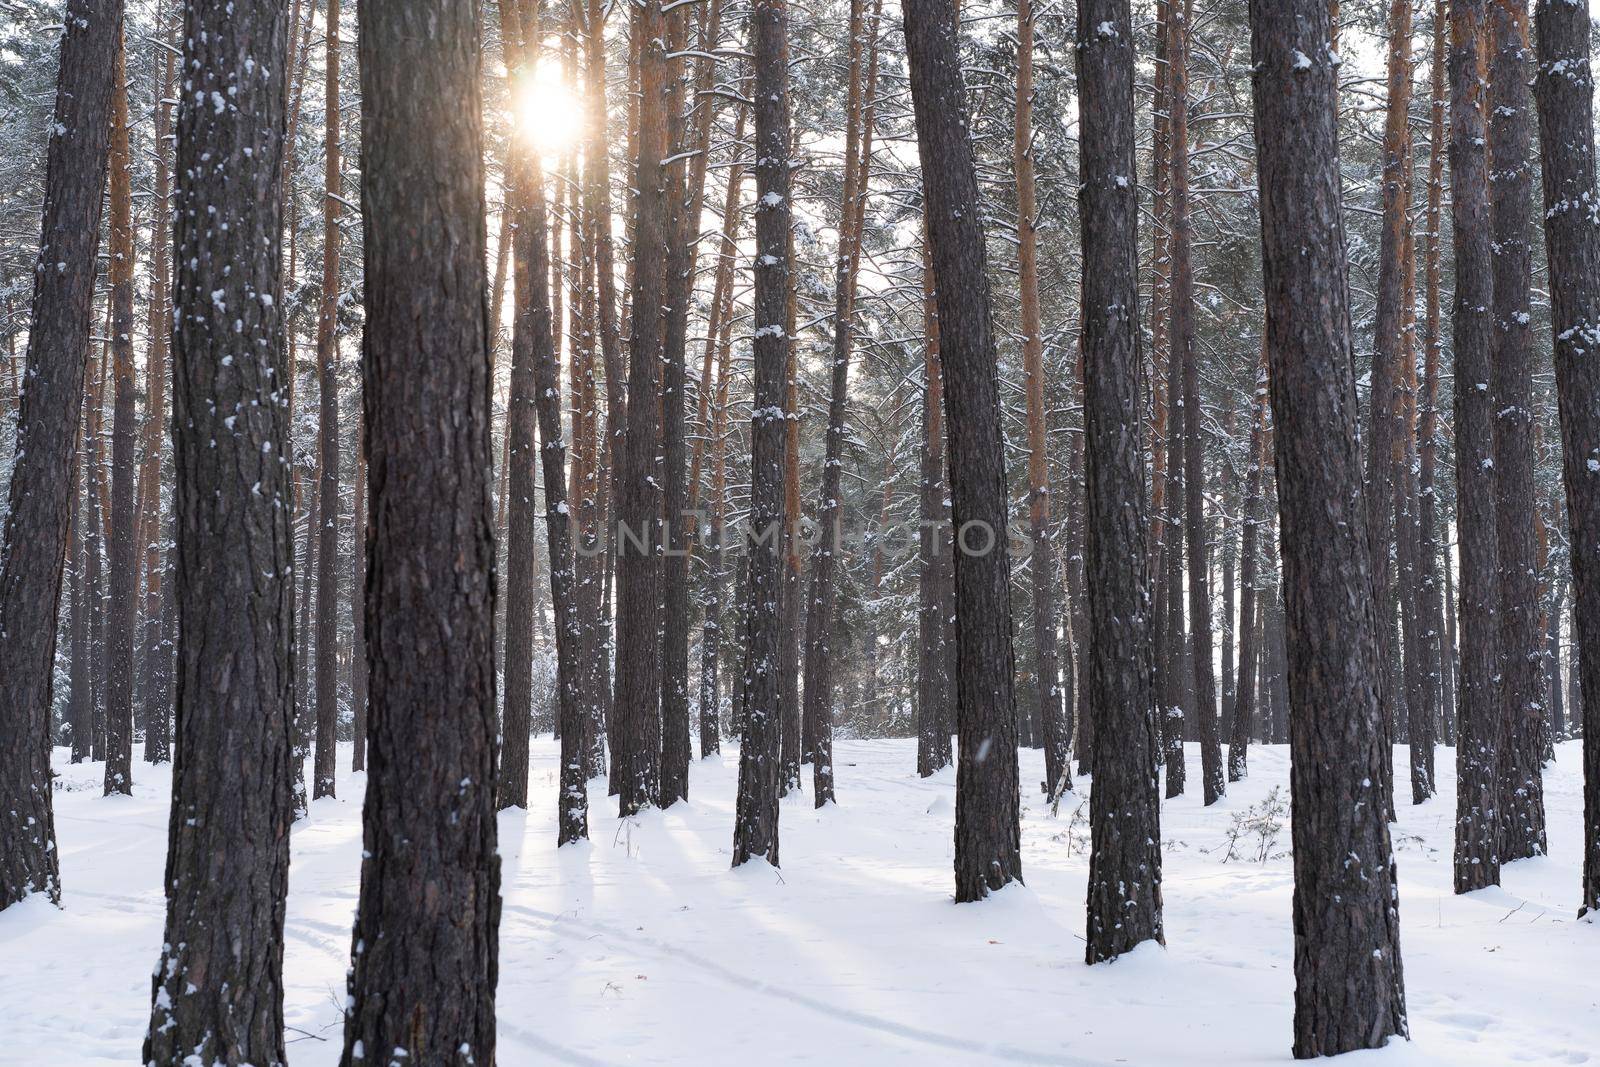 Early spring landscape of the snow in the pine forest. Landscape only tree trunks